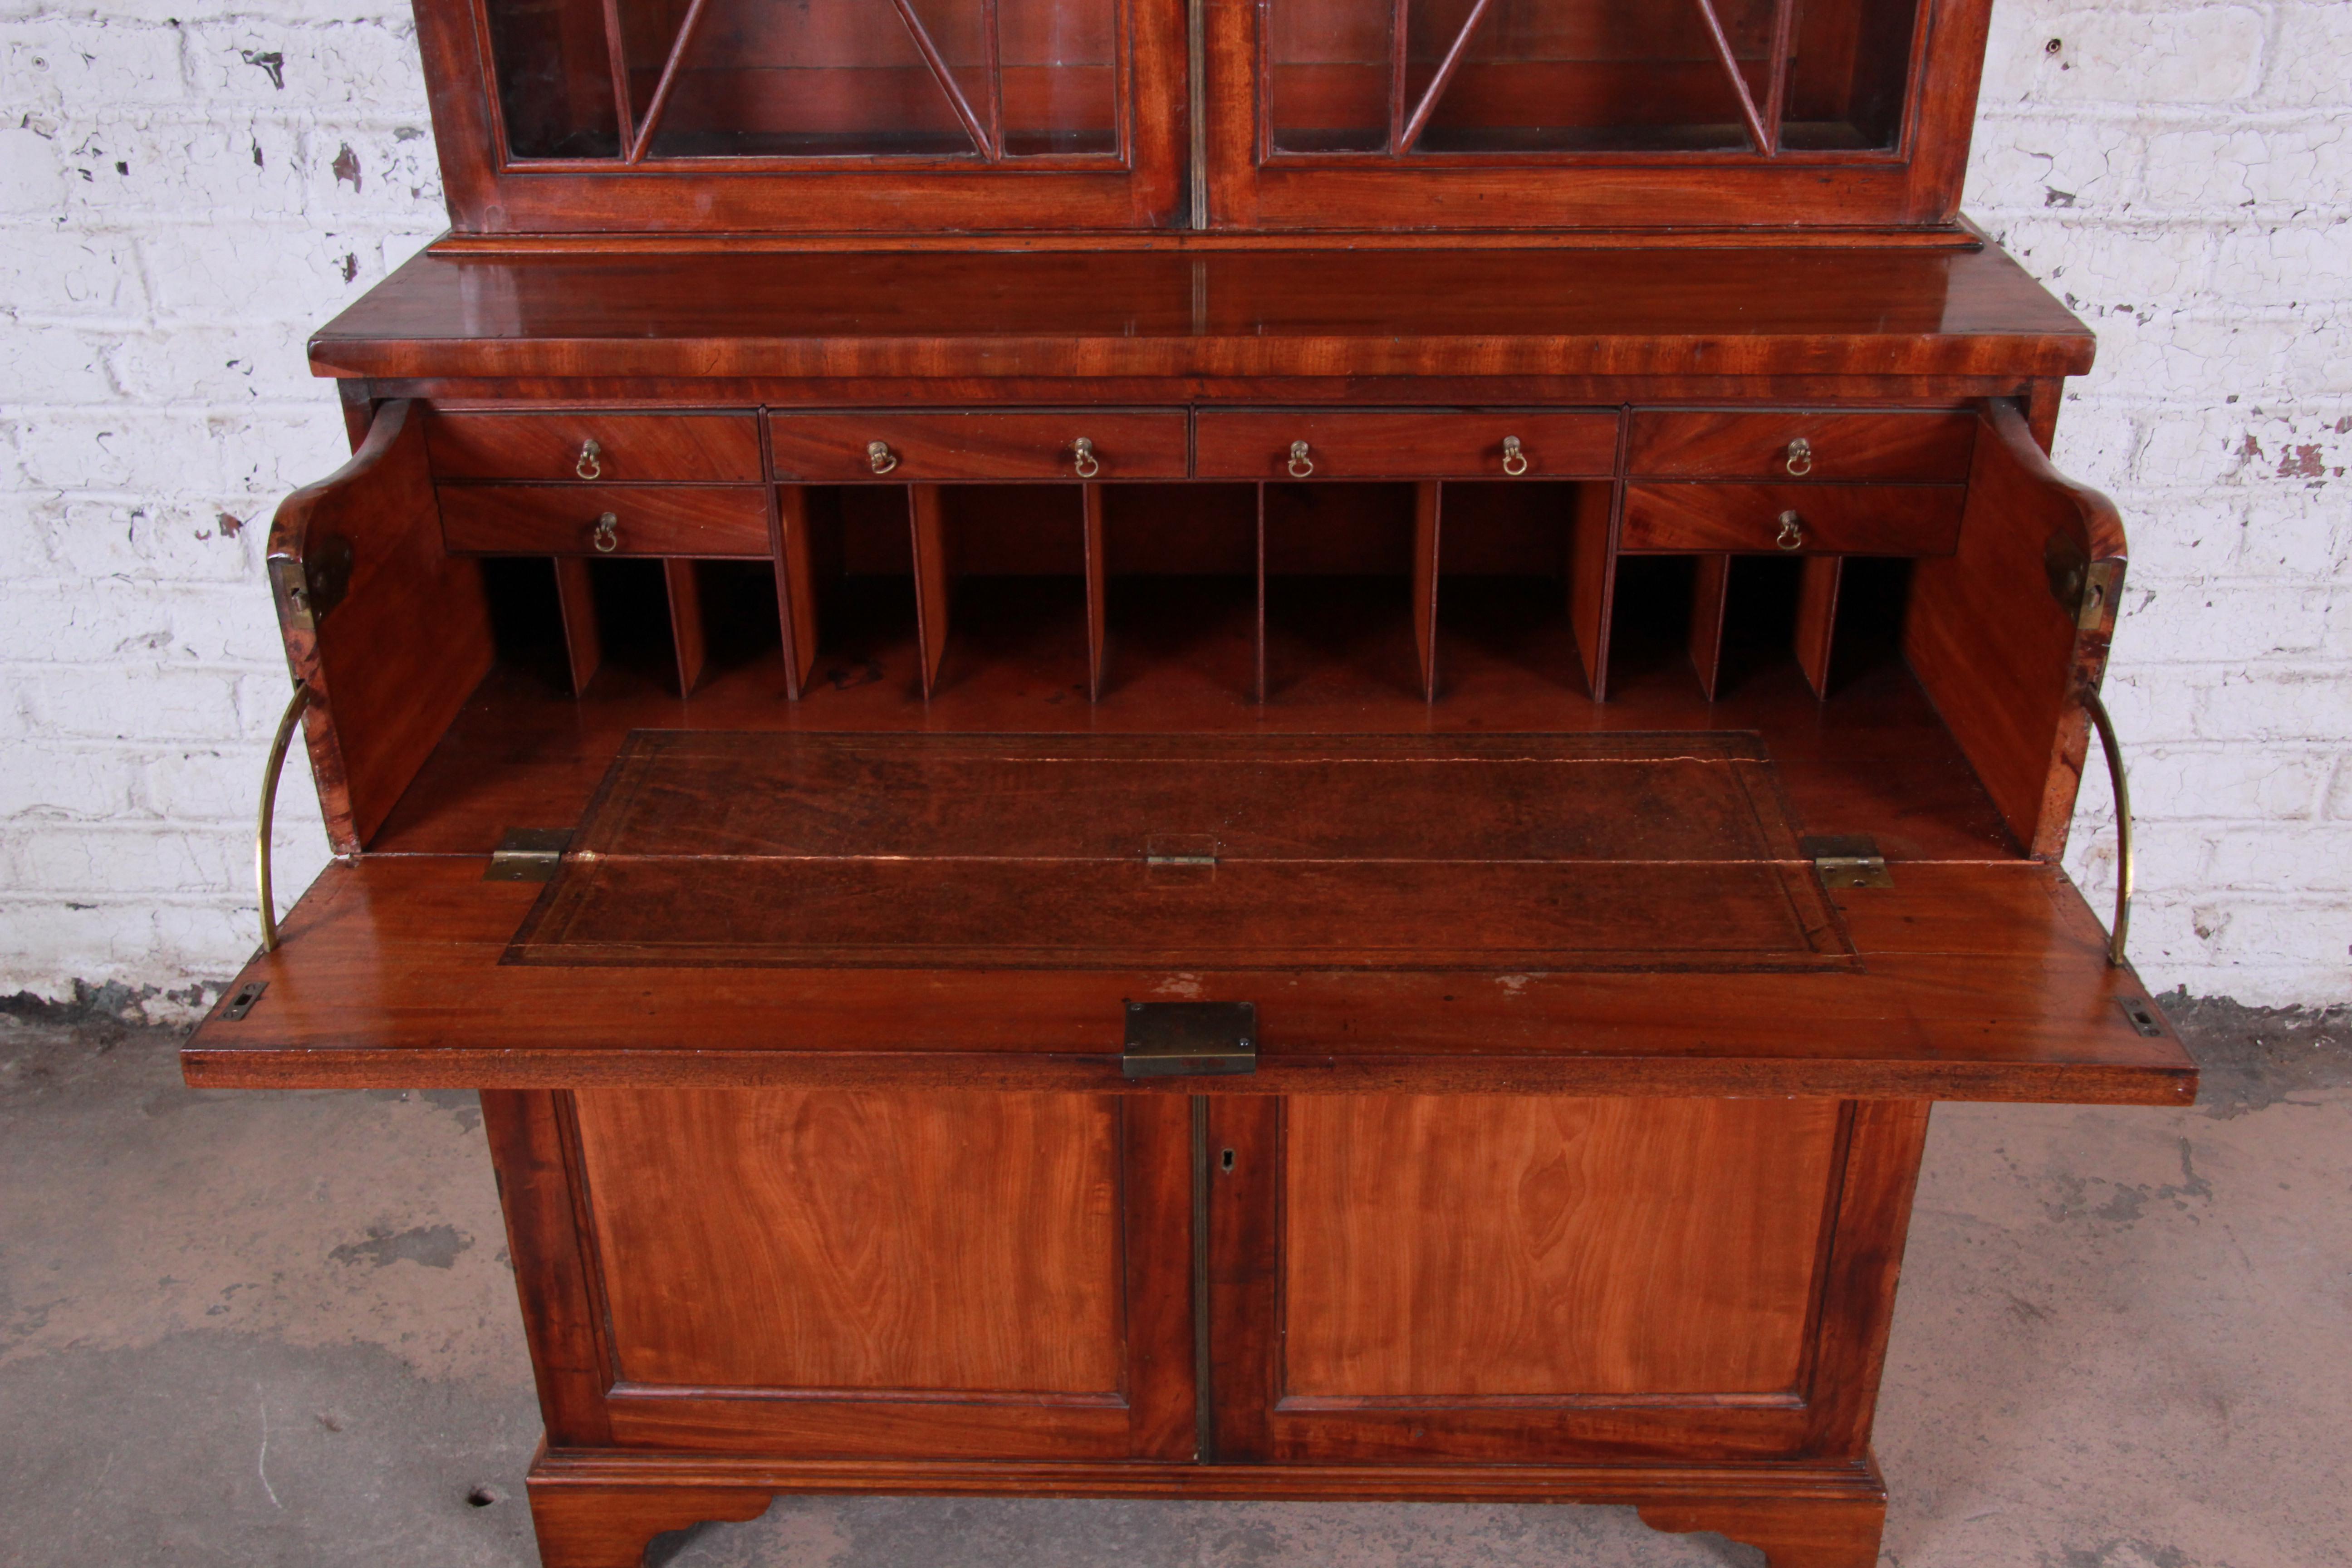 19th Century English George III Style Drop Front Secretary Desk with Bookcase, circa 1870